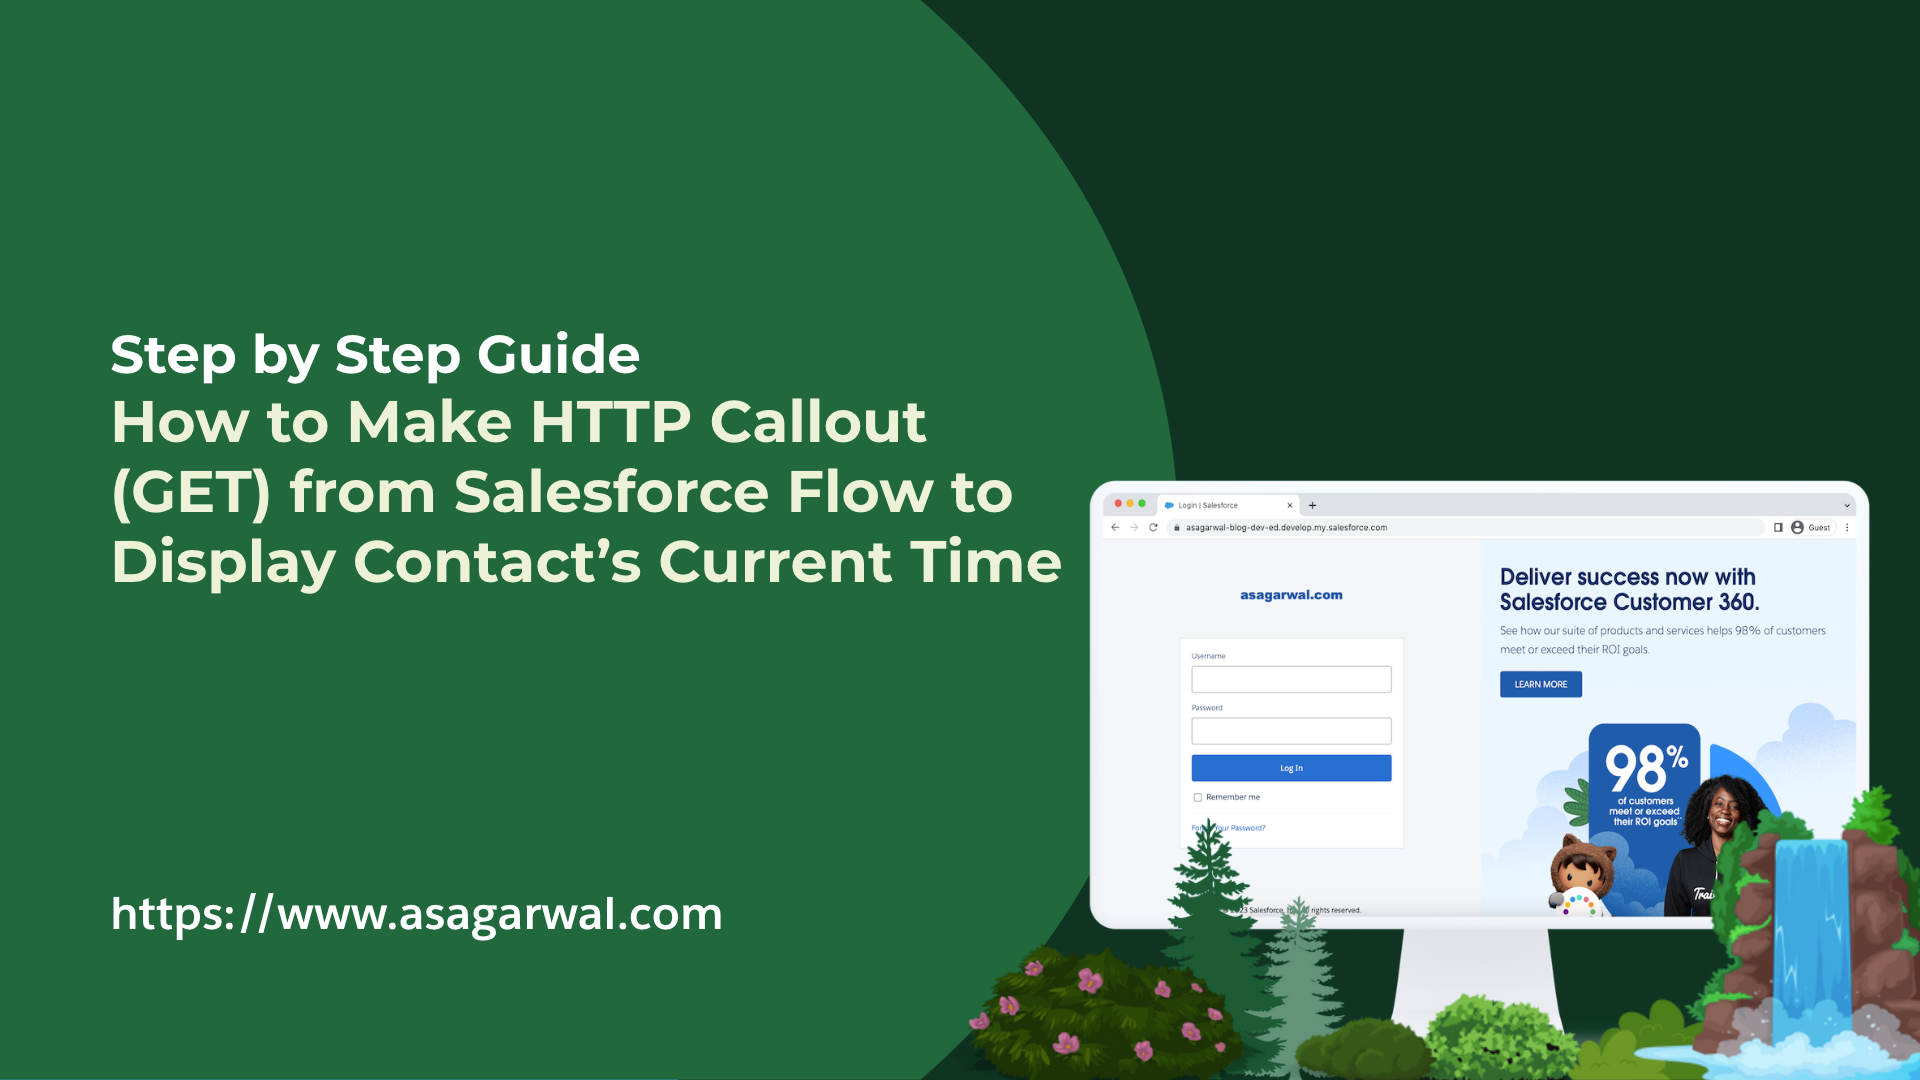 How to Make HTTP Callout (GET) from Salesforce Flow